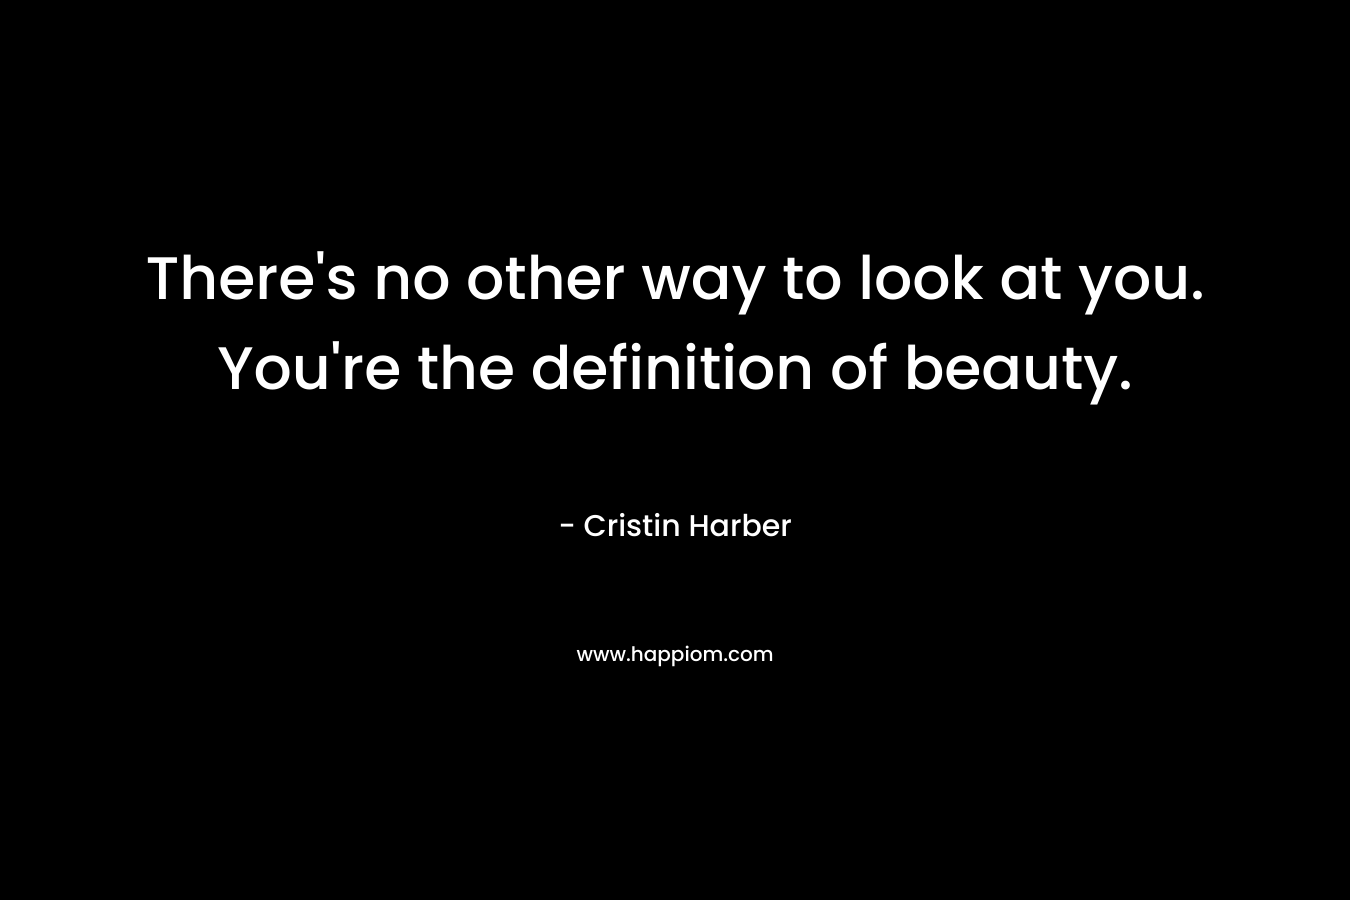 There’s no other way to look at you. You’re the definition of beauty. – Cristin Harber